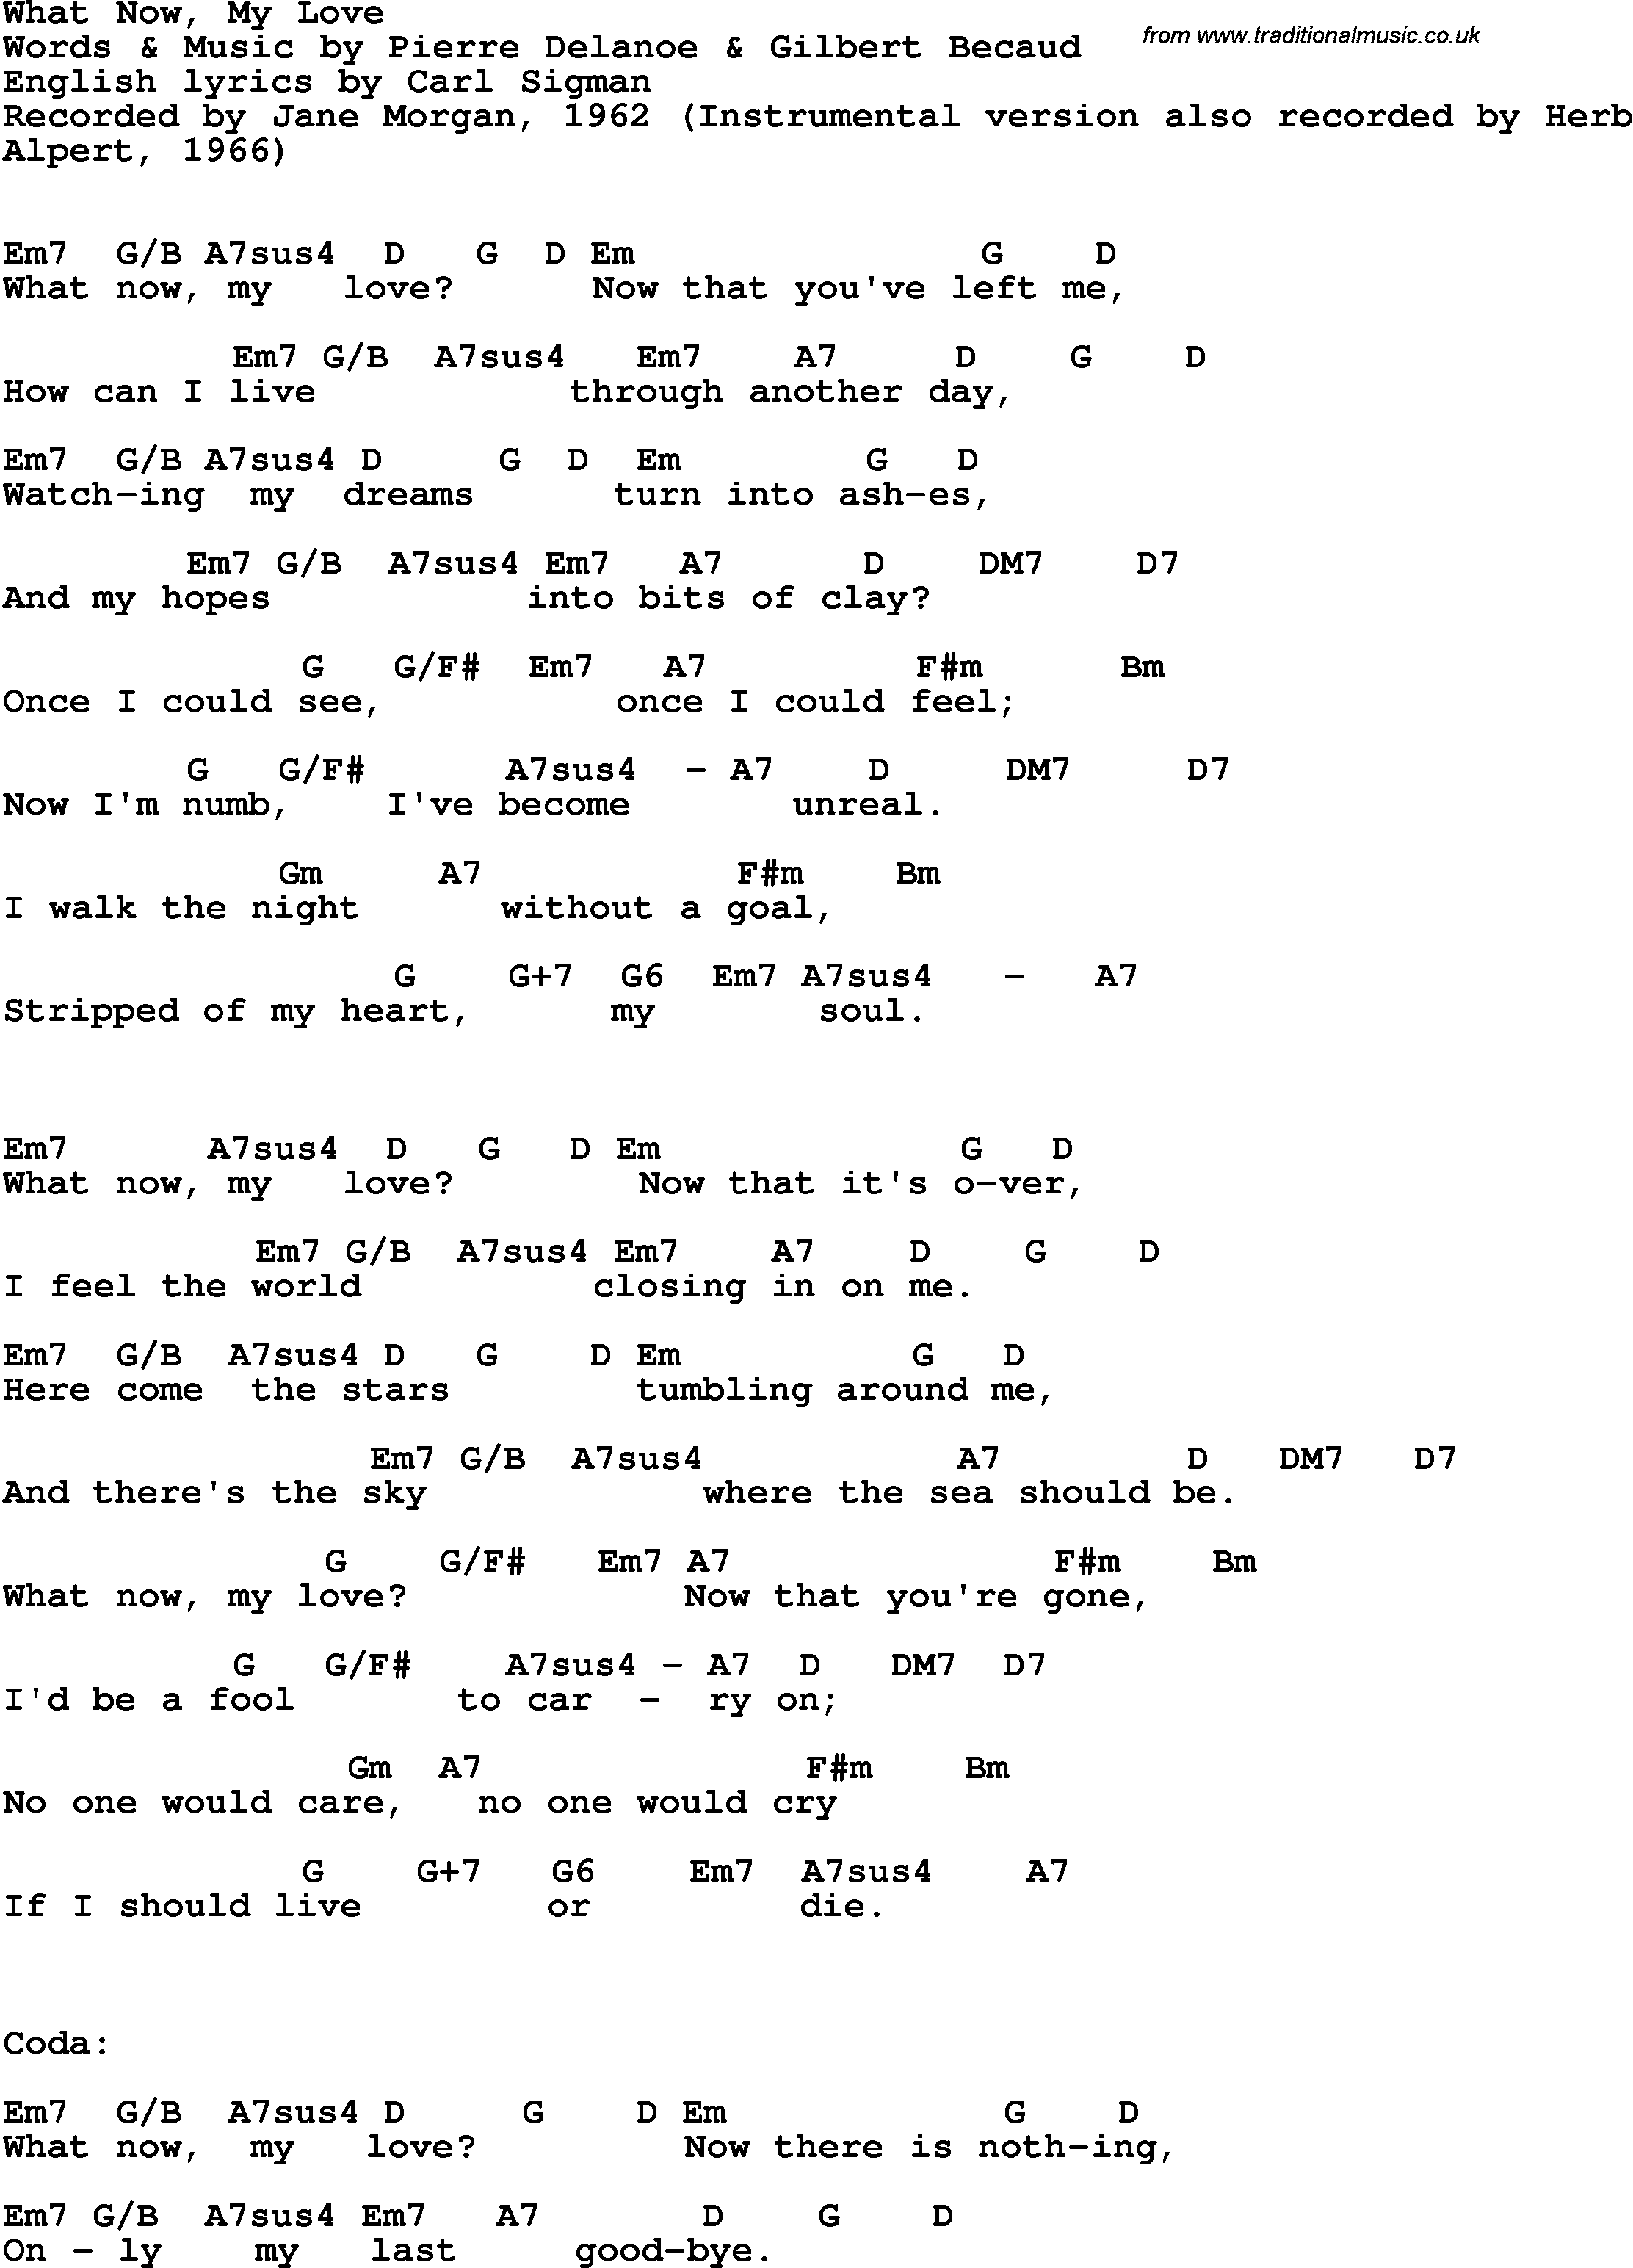 Song Lyrics with guitar chords for What Now My Love - Jane Morgan, 1962